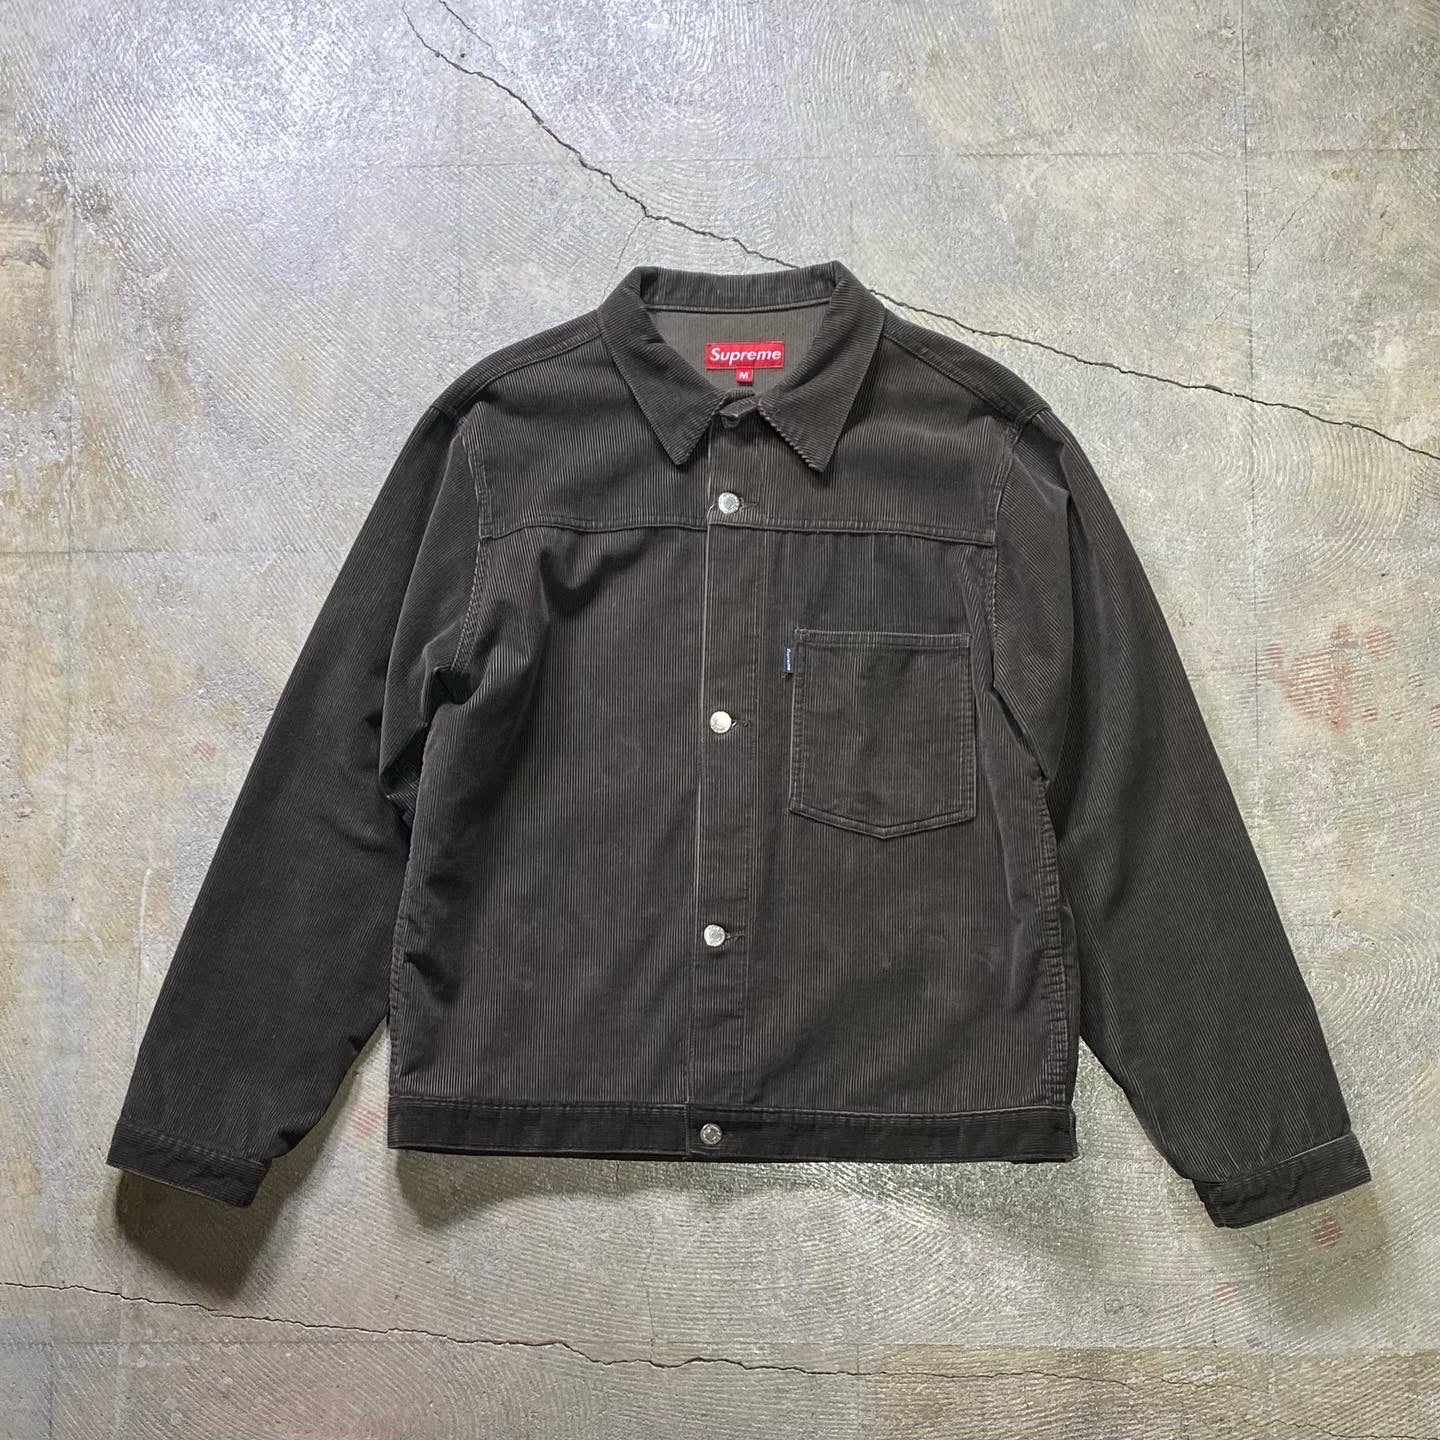 Old Supreme Corduroy Jacket 1st Type (GOOD CONDITION / size M) – LEAD